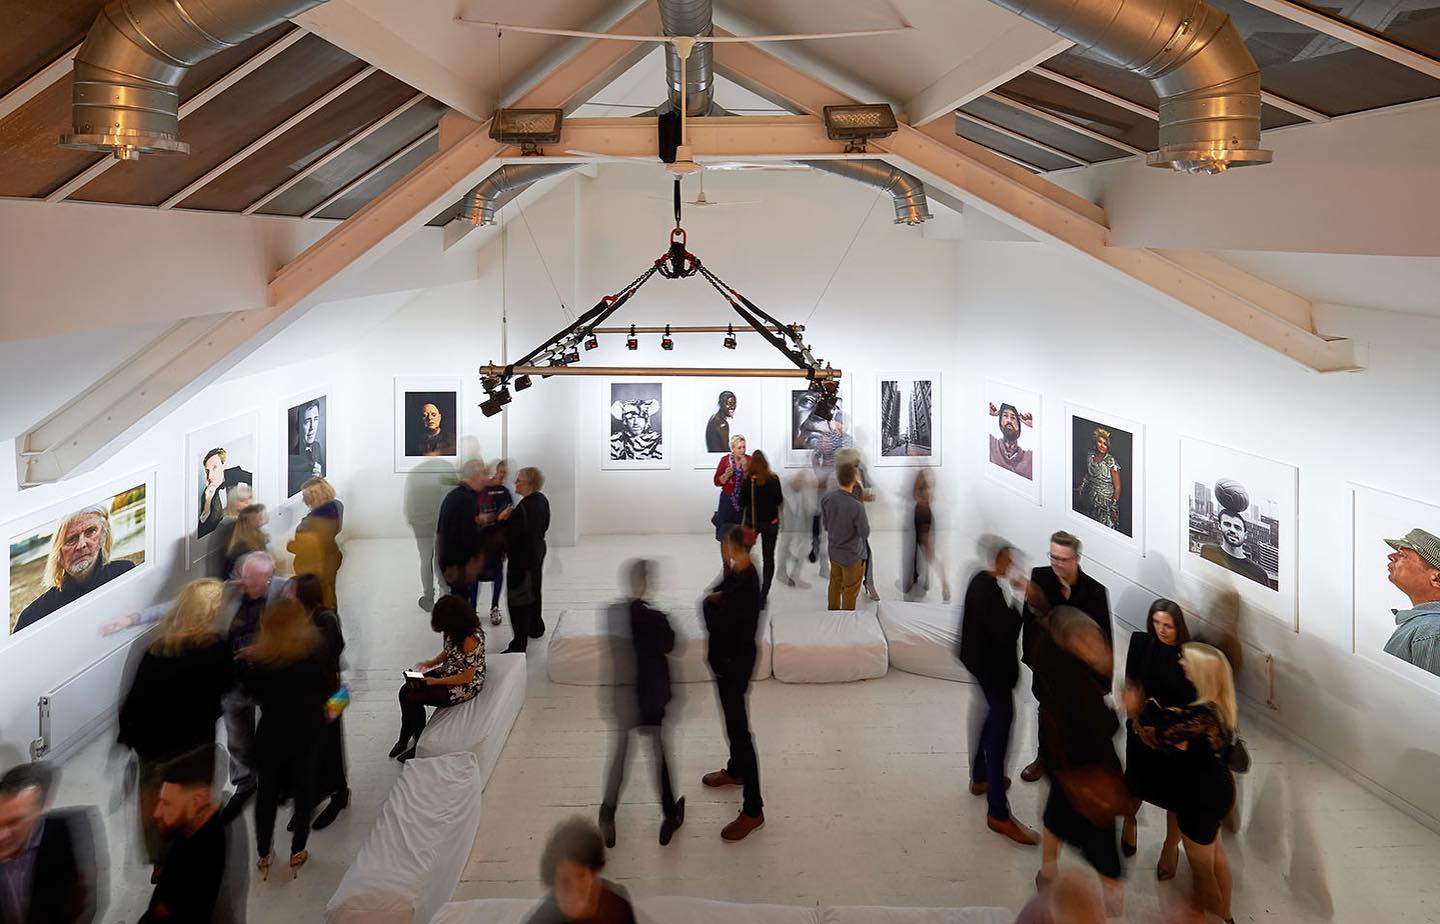 The Loft doubling as an art gallery for the showing of David Oldham’s portraits to support Andy Burnham’s homeless initiative, A Bed Every Night ⚡️
•
@davidoldhamphoto 
@andyburnhamgm 
•
#gallery #show #galleryshow #galleryspace #studio #studiospace #charity #charityevent #charityexhibition #exhibition #exhibitionspace #loft #loftstudio #location #locationscout #studiohire #venue #venuehire #photographystudio #artstudio #manchestervenue #fivefourstudios #manchester